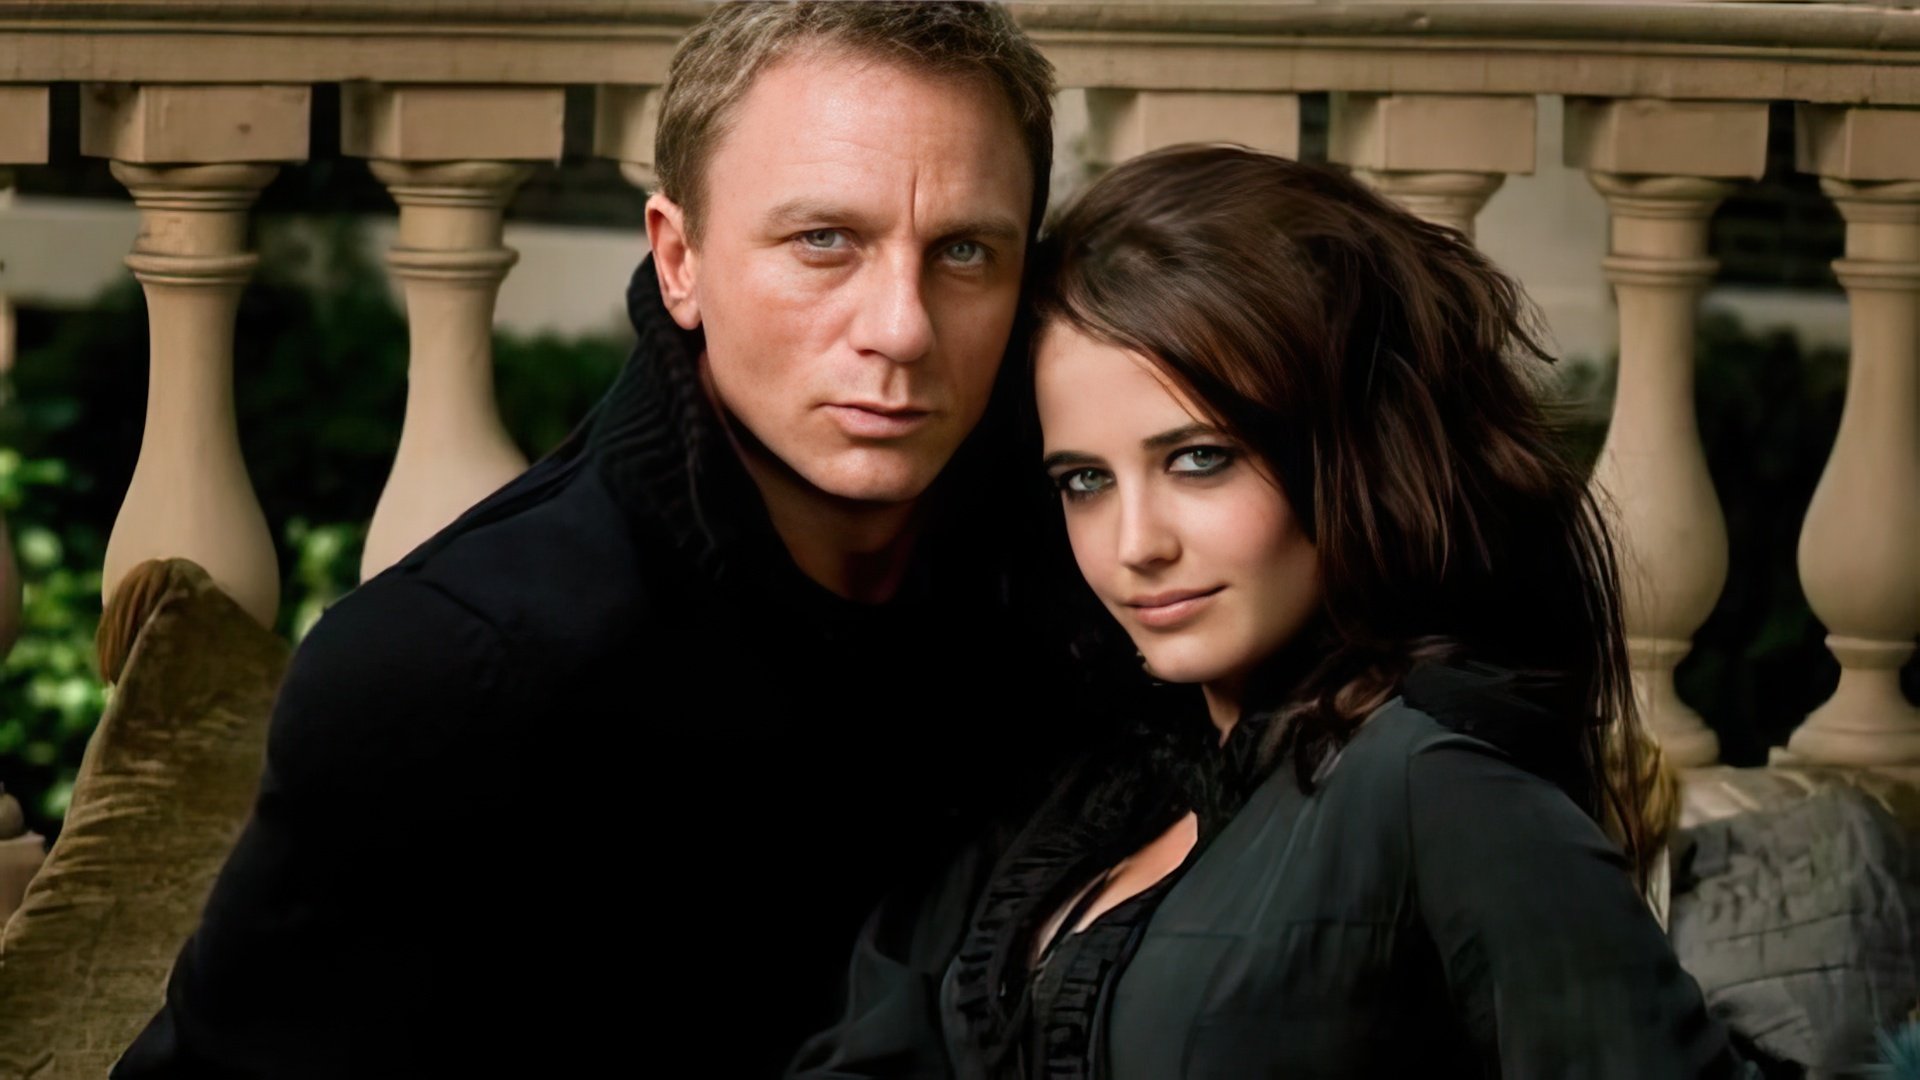 Daniel Craig and Eva Green starred together in Casino Royale